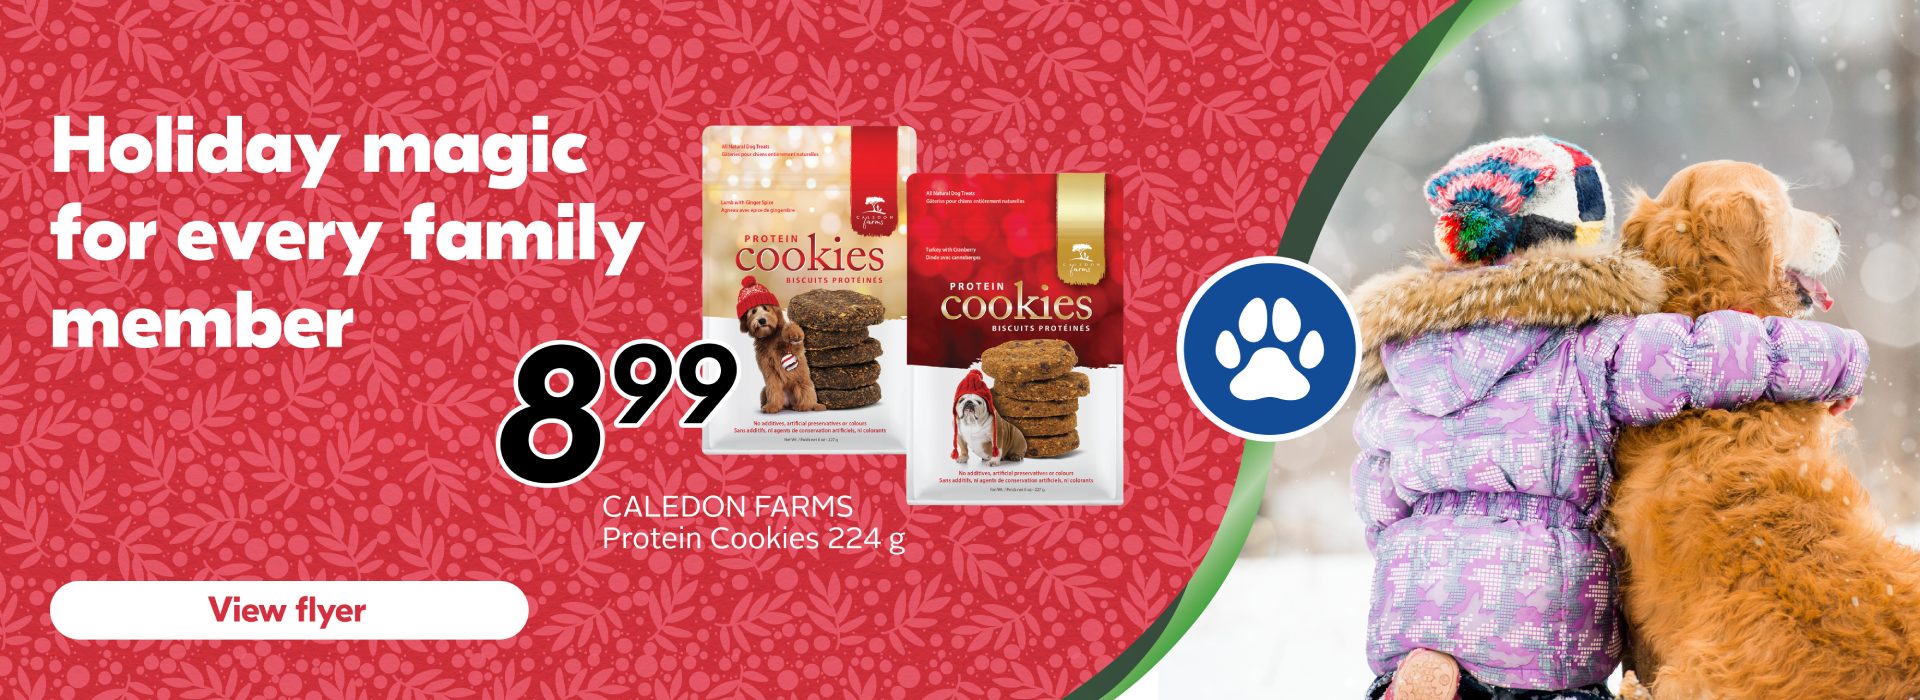 Text Reading 'Holiday magic for every family member. Buy Caledon Farms Protein Cookies (224 g) for $8.99. 'View Flyer' by clicking on the button below.'